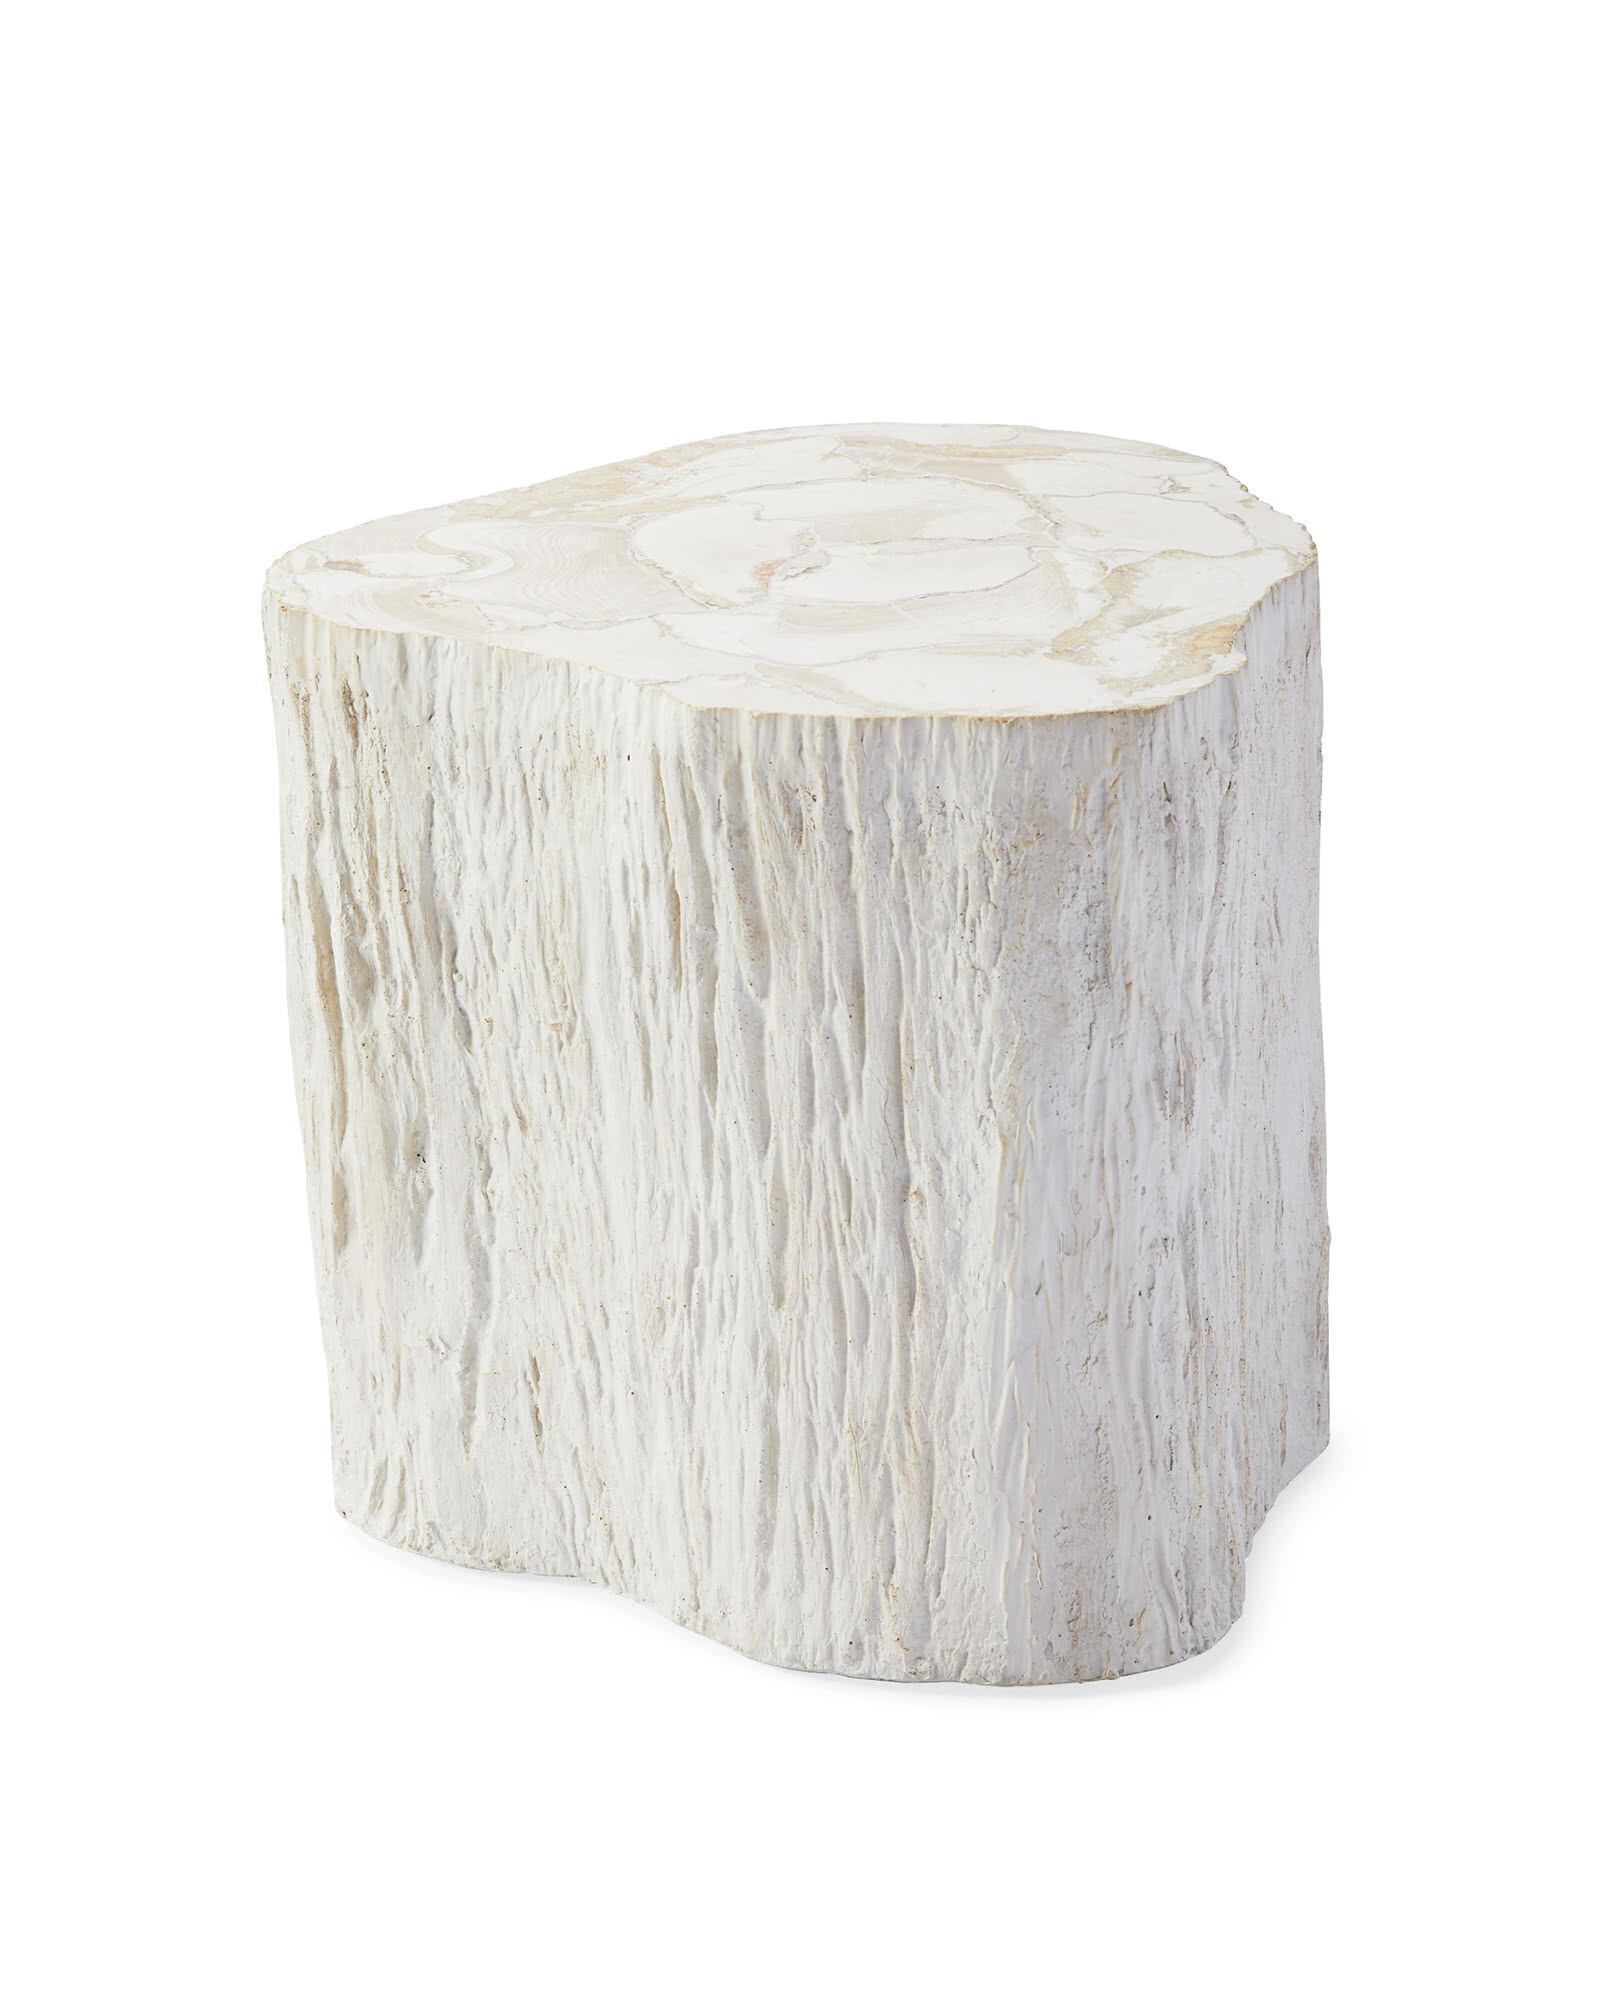 Truro Side Table | Serena and Lily